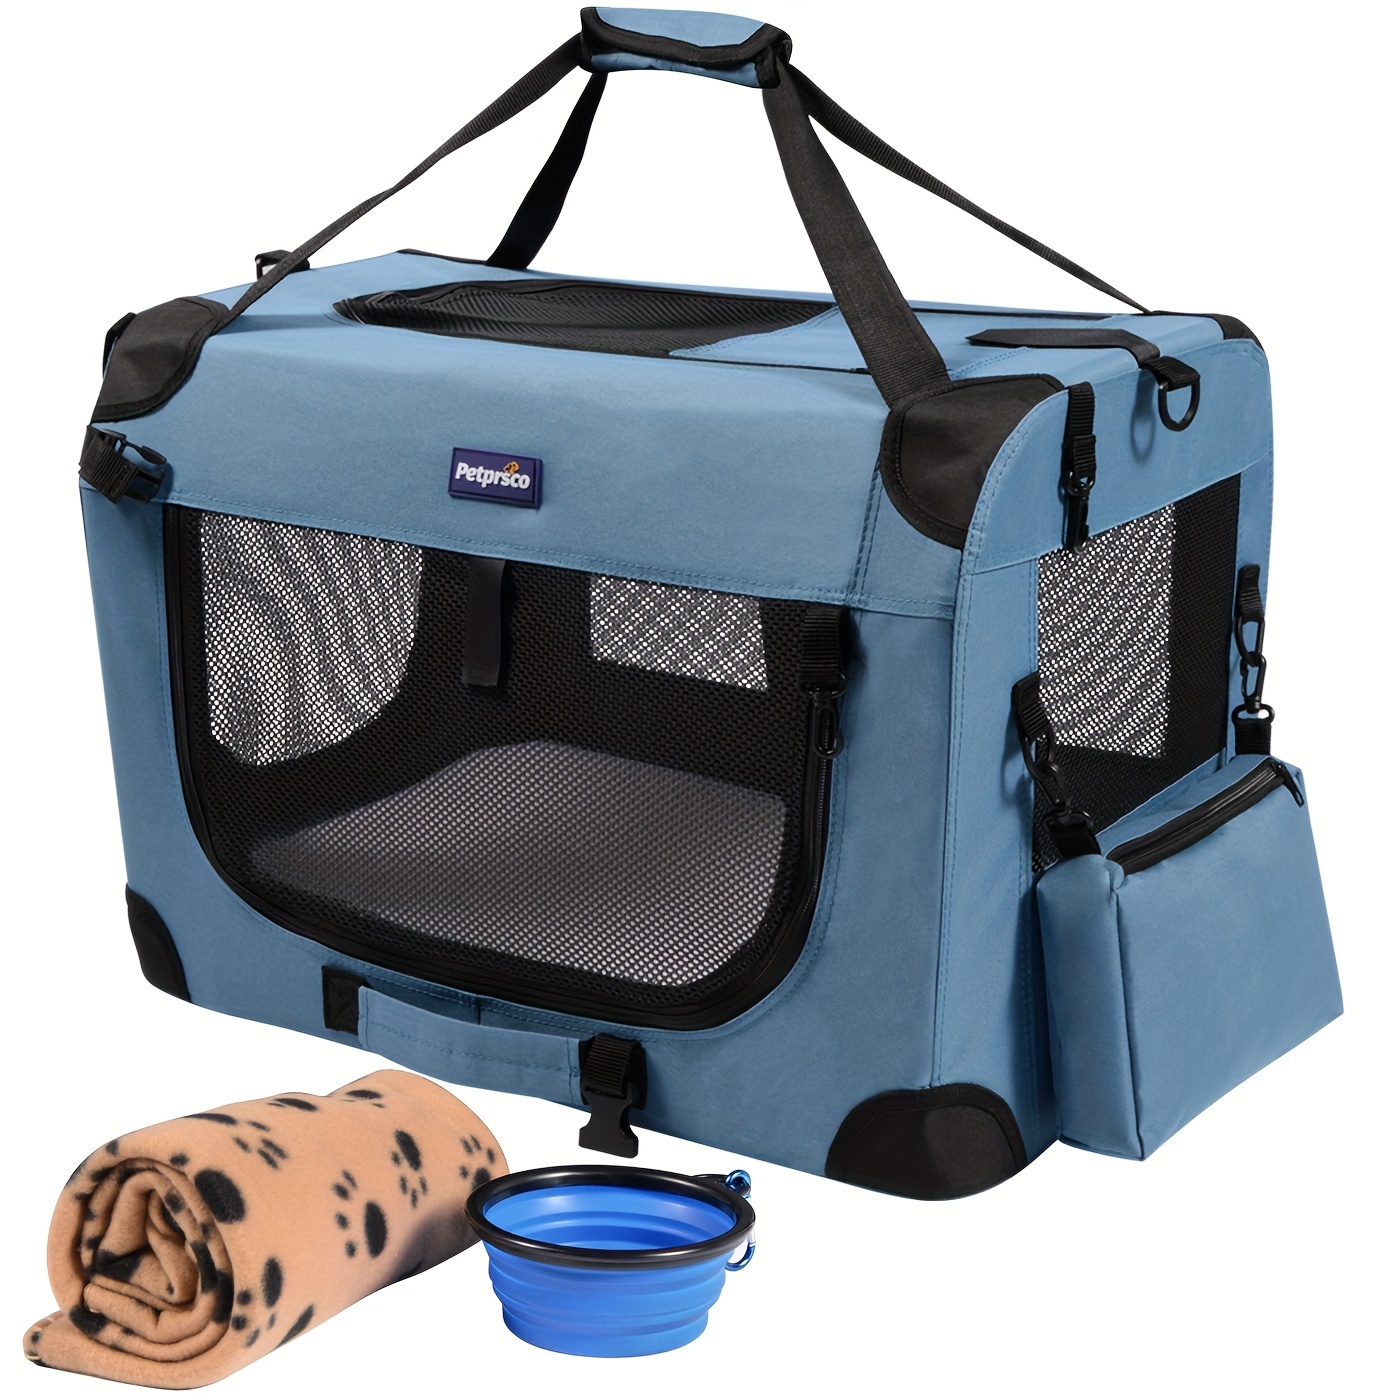 

Portable Collapsible Dog Crate, Travel Dog Carrier, Soft Warm Blanket And Foldable Bowl For Large Cats & Small Dogs Indoor And Outdoor